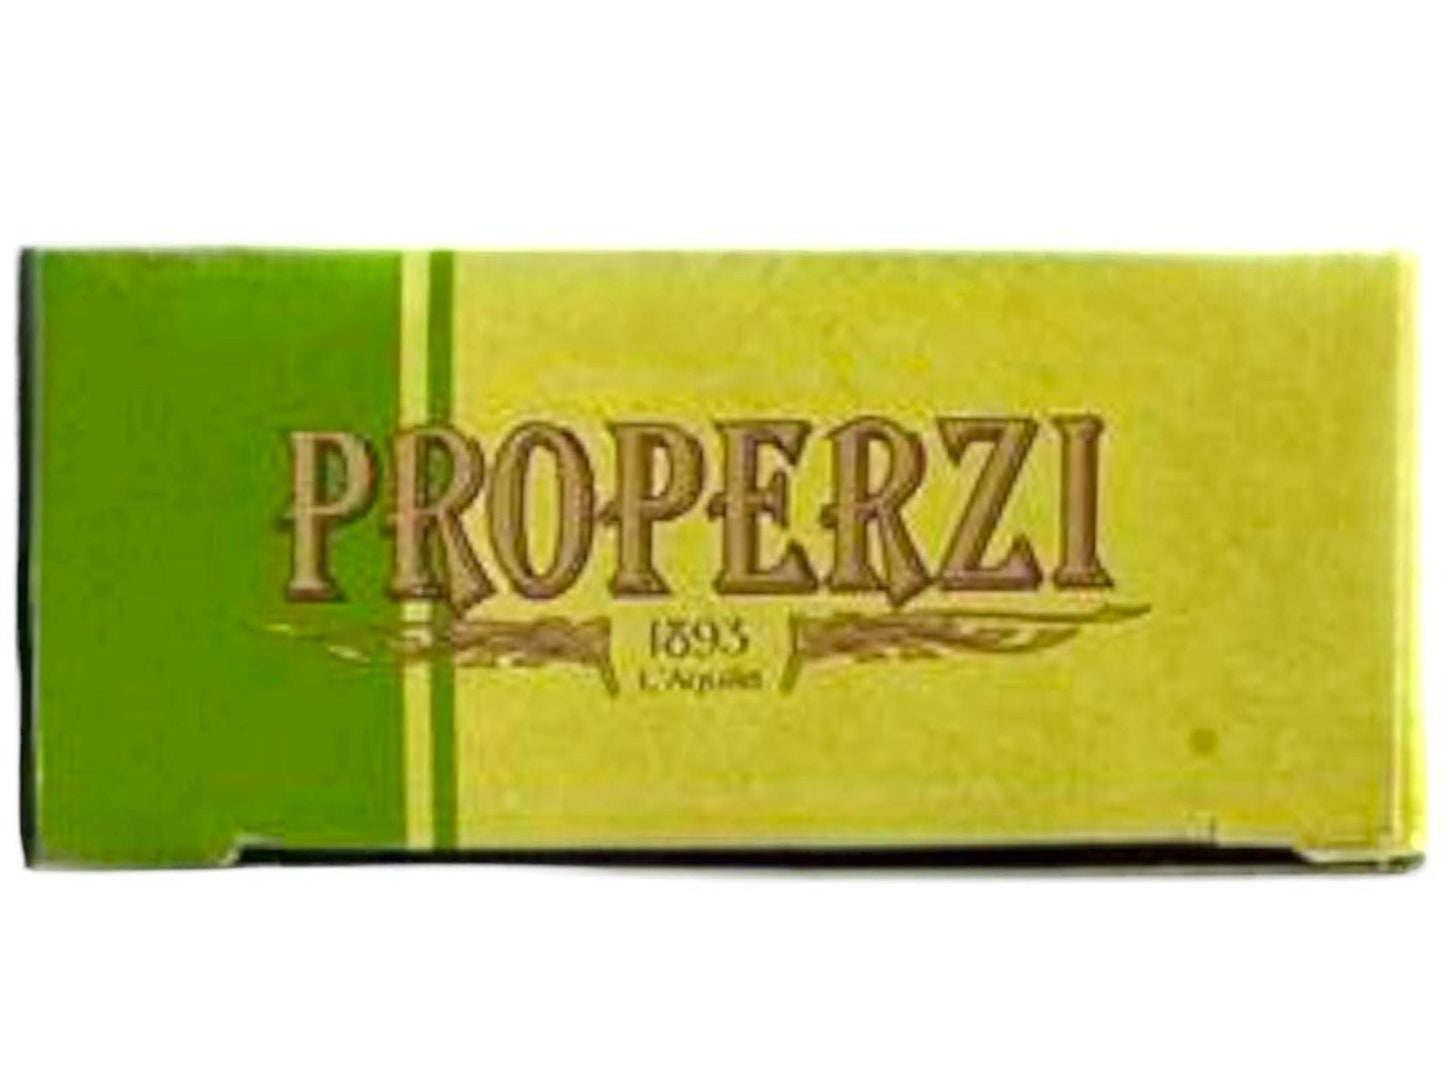 Properzi Italian Soft Nougat Candy With Almonds and Lemon 200g - 2 Pack Total 400g Best Before End of February 2025